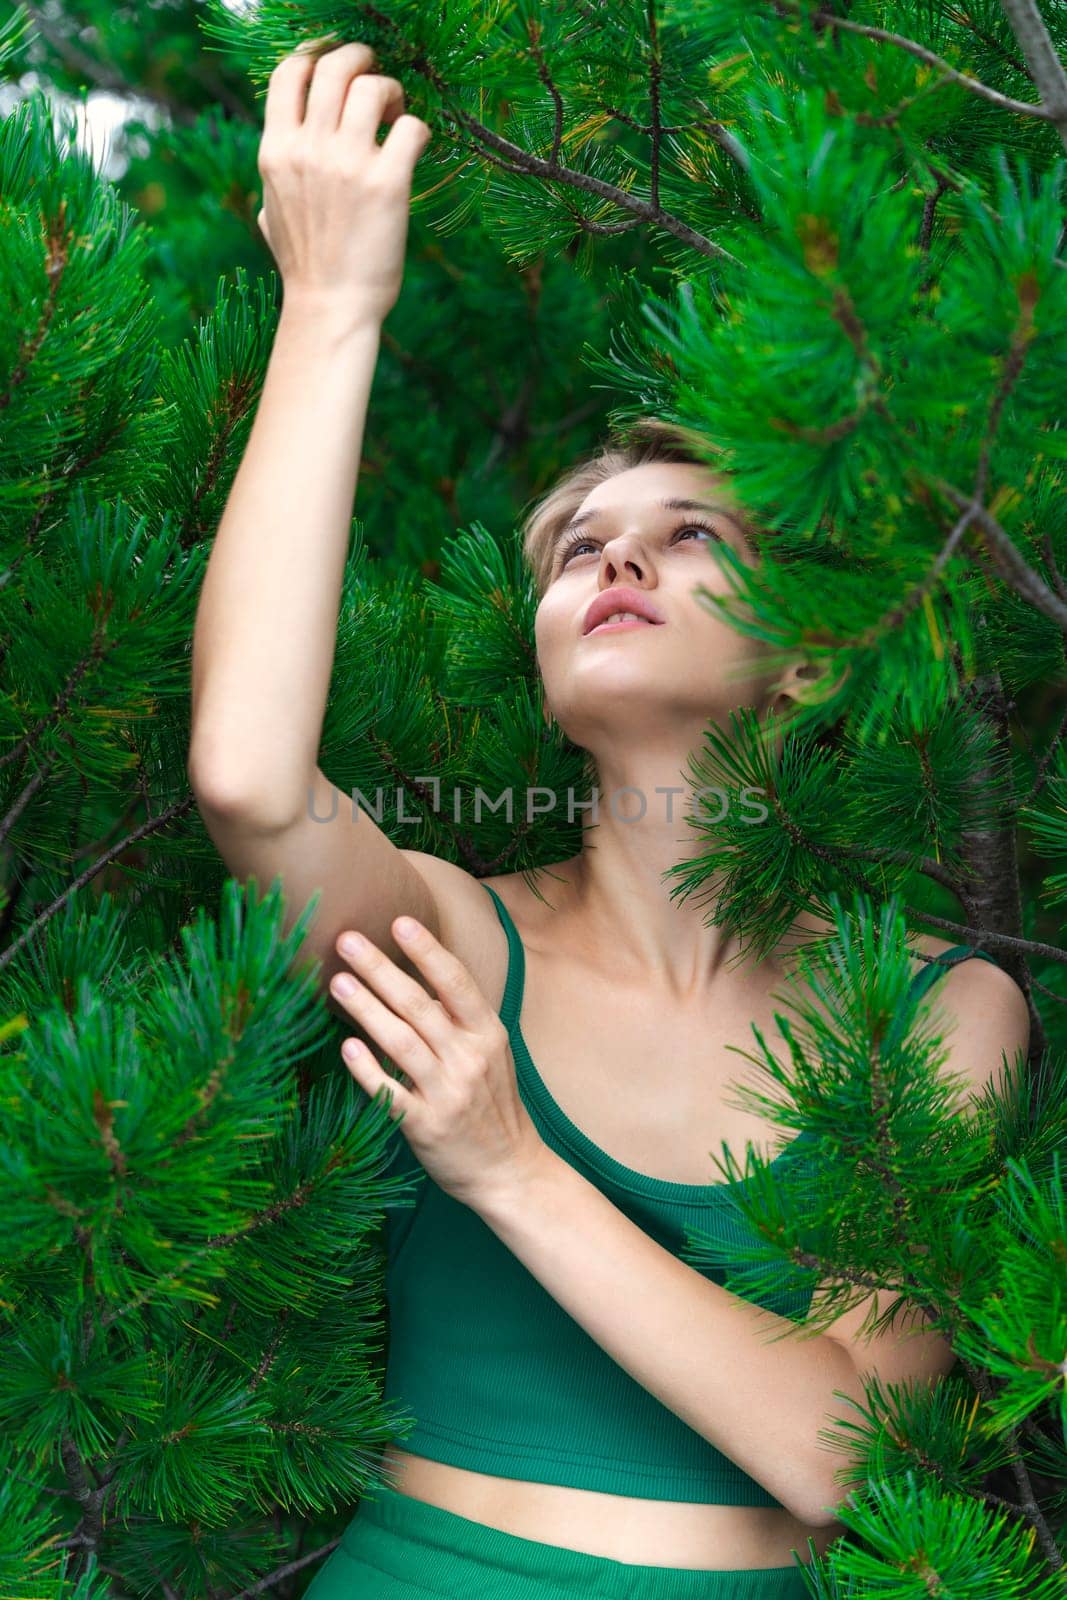 Nosy blonde woman pulls both hands up and looking up, posing against backdrop of an evergreen shrub of Pinus Pumila. Cute Caucasian adult female dressed in green crop top. Part of series